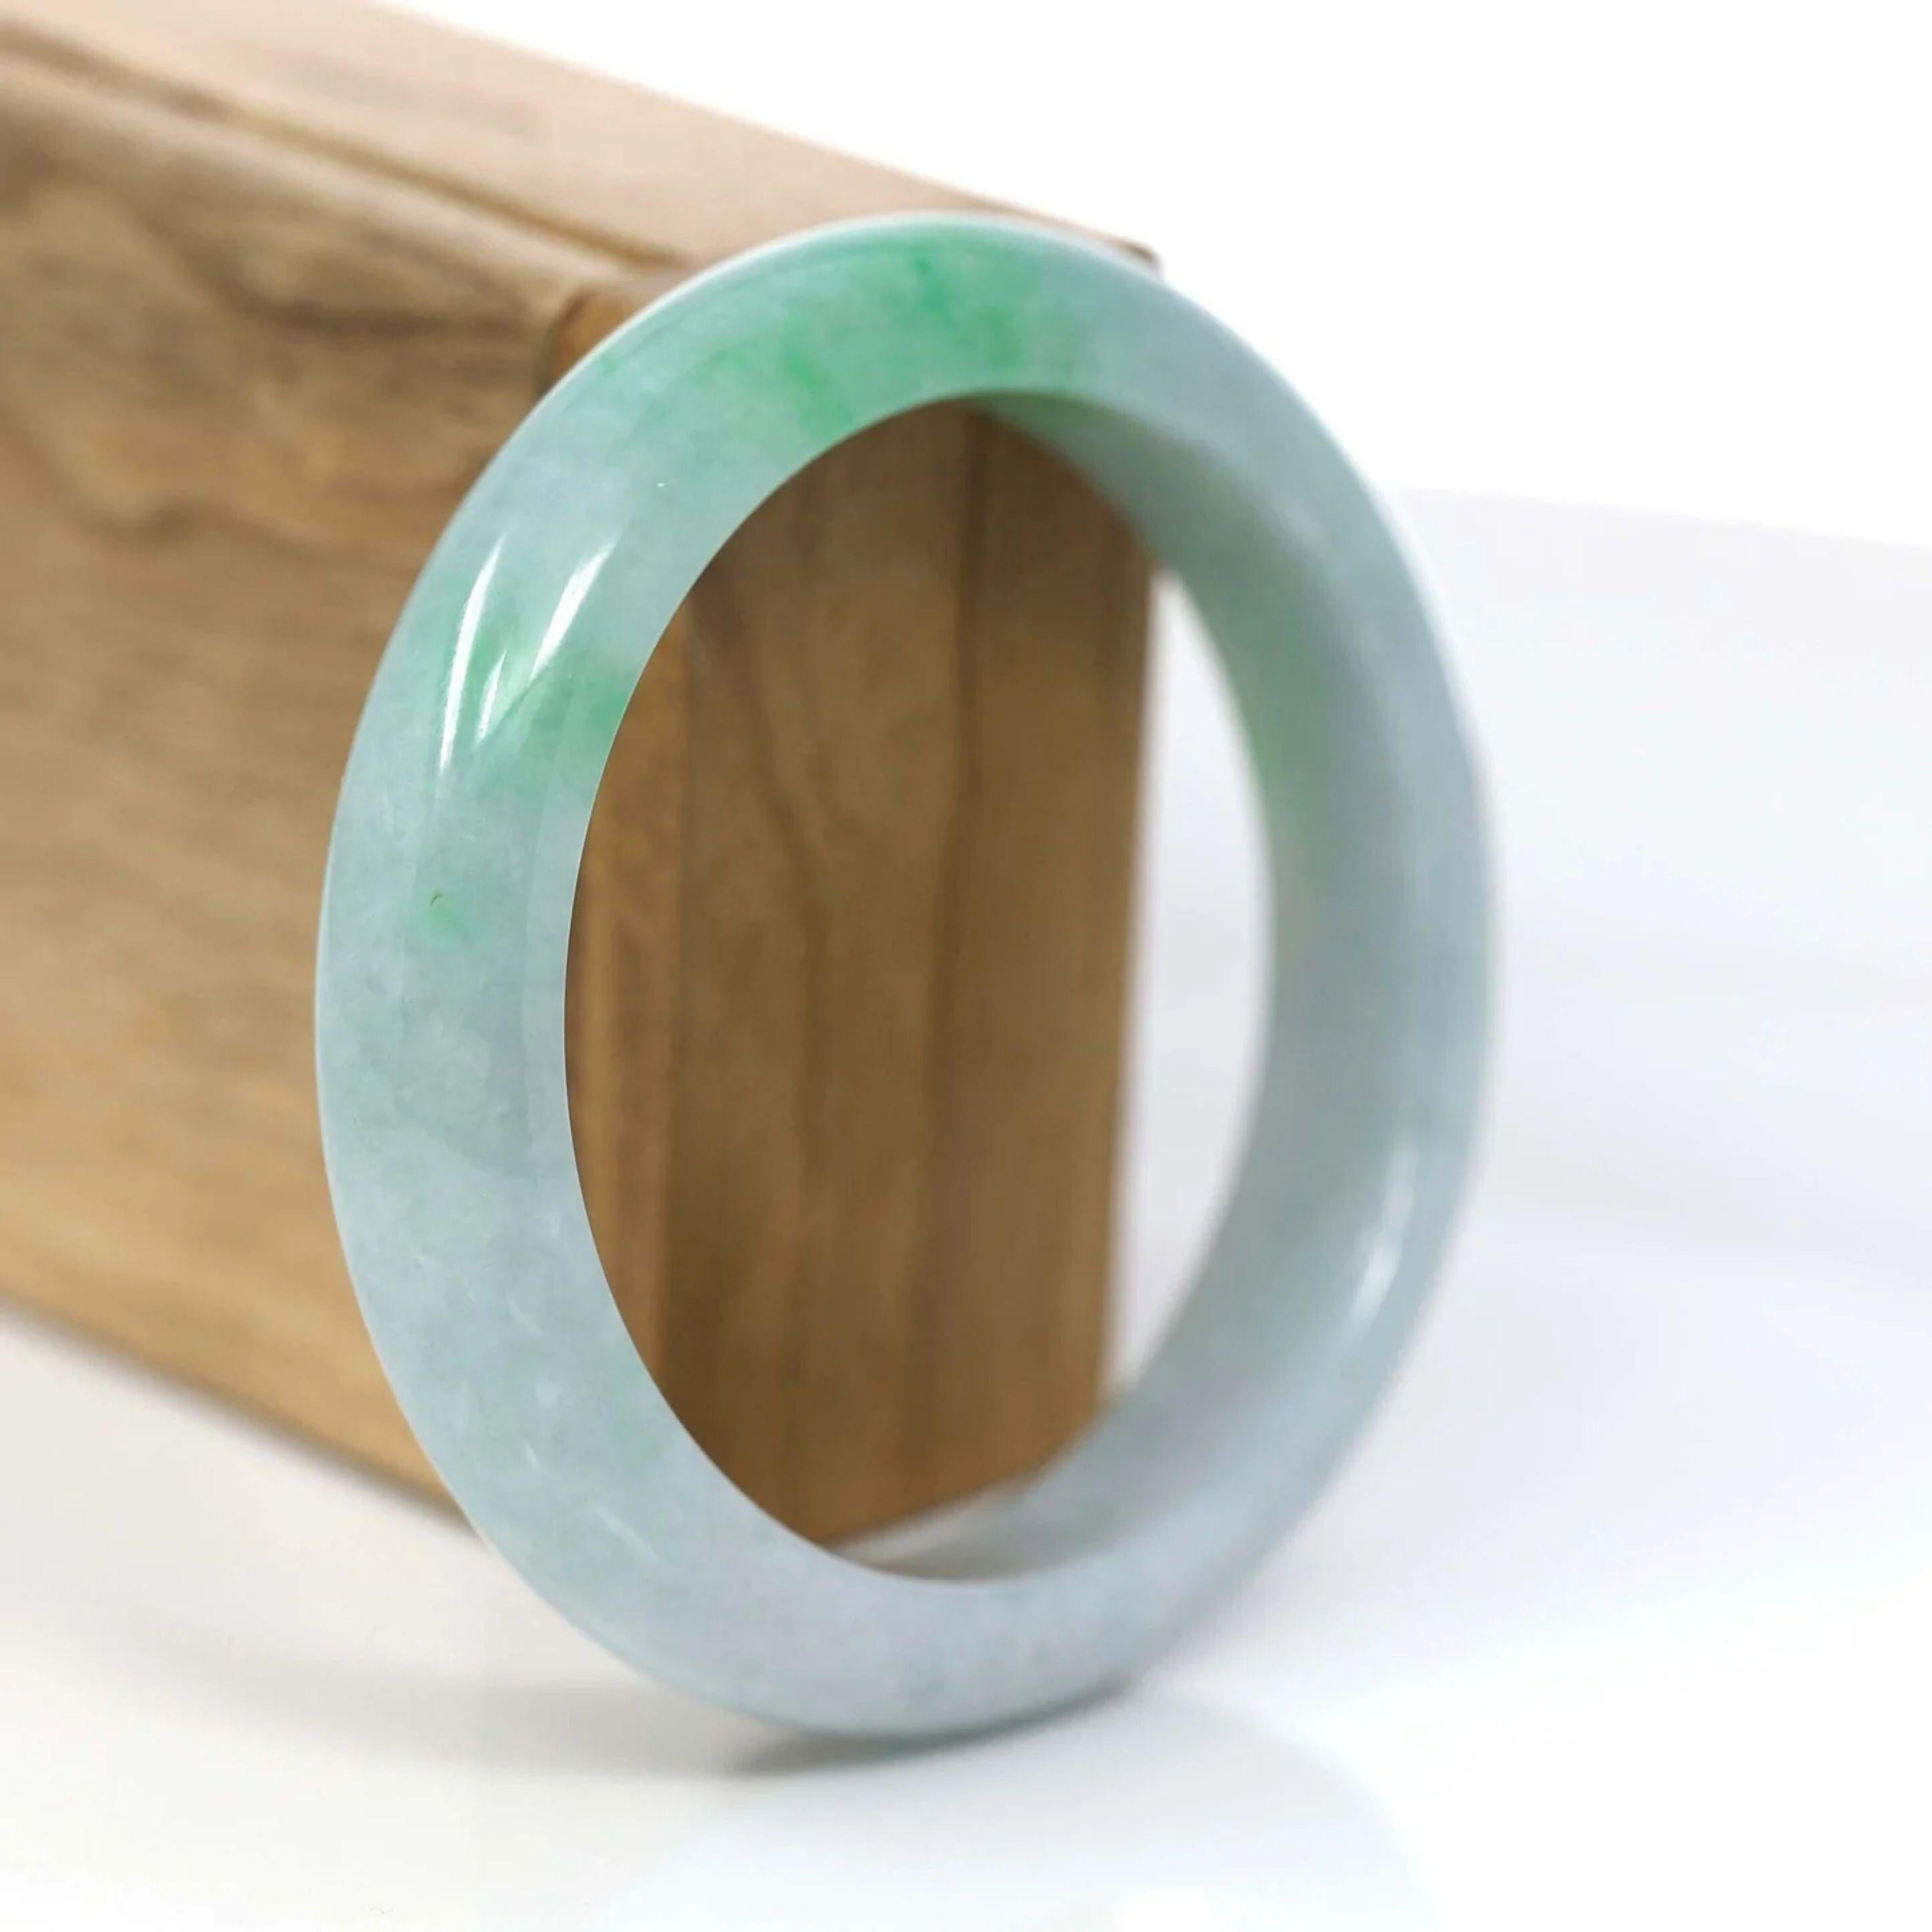 * DETAILS---This bangle is made with high-quality genuine Burmese green Jadeite jade, the jade texture is transparent with green colors. The green color and transparency, truly a mesmerizing combination. It looks much better in person. This bangle